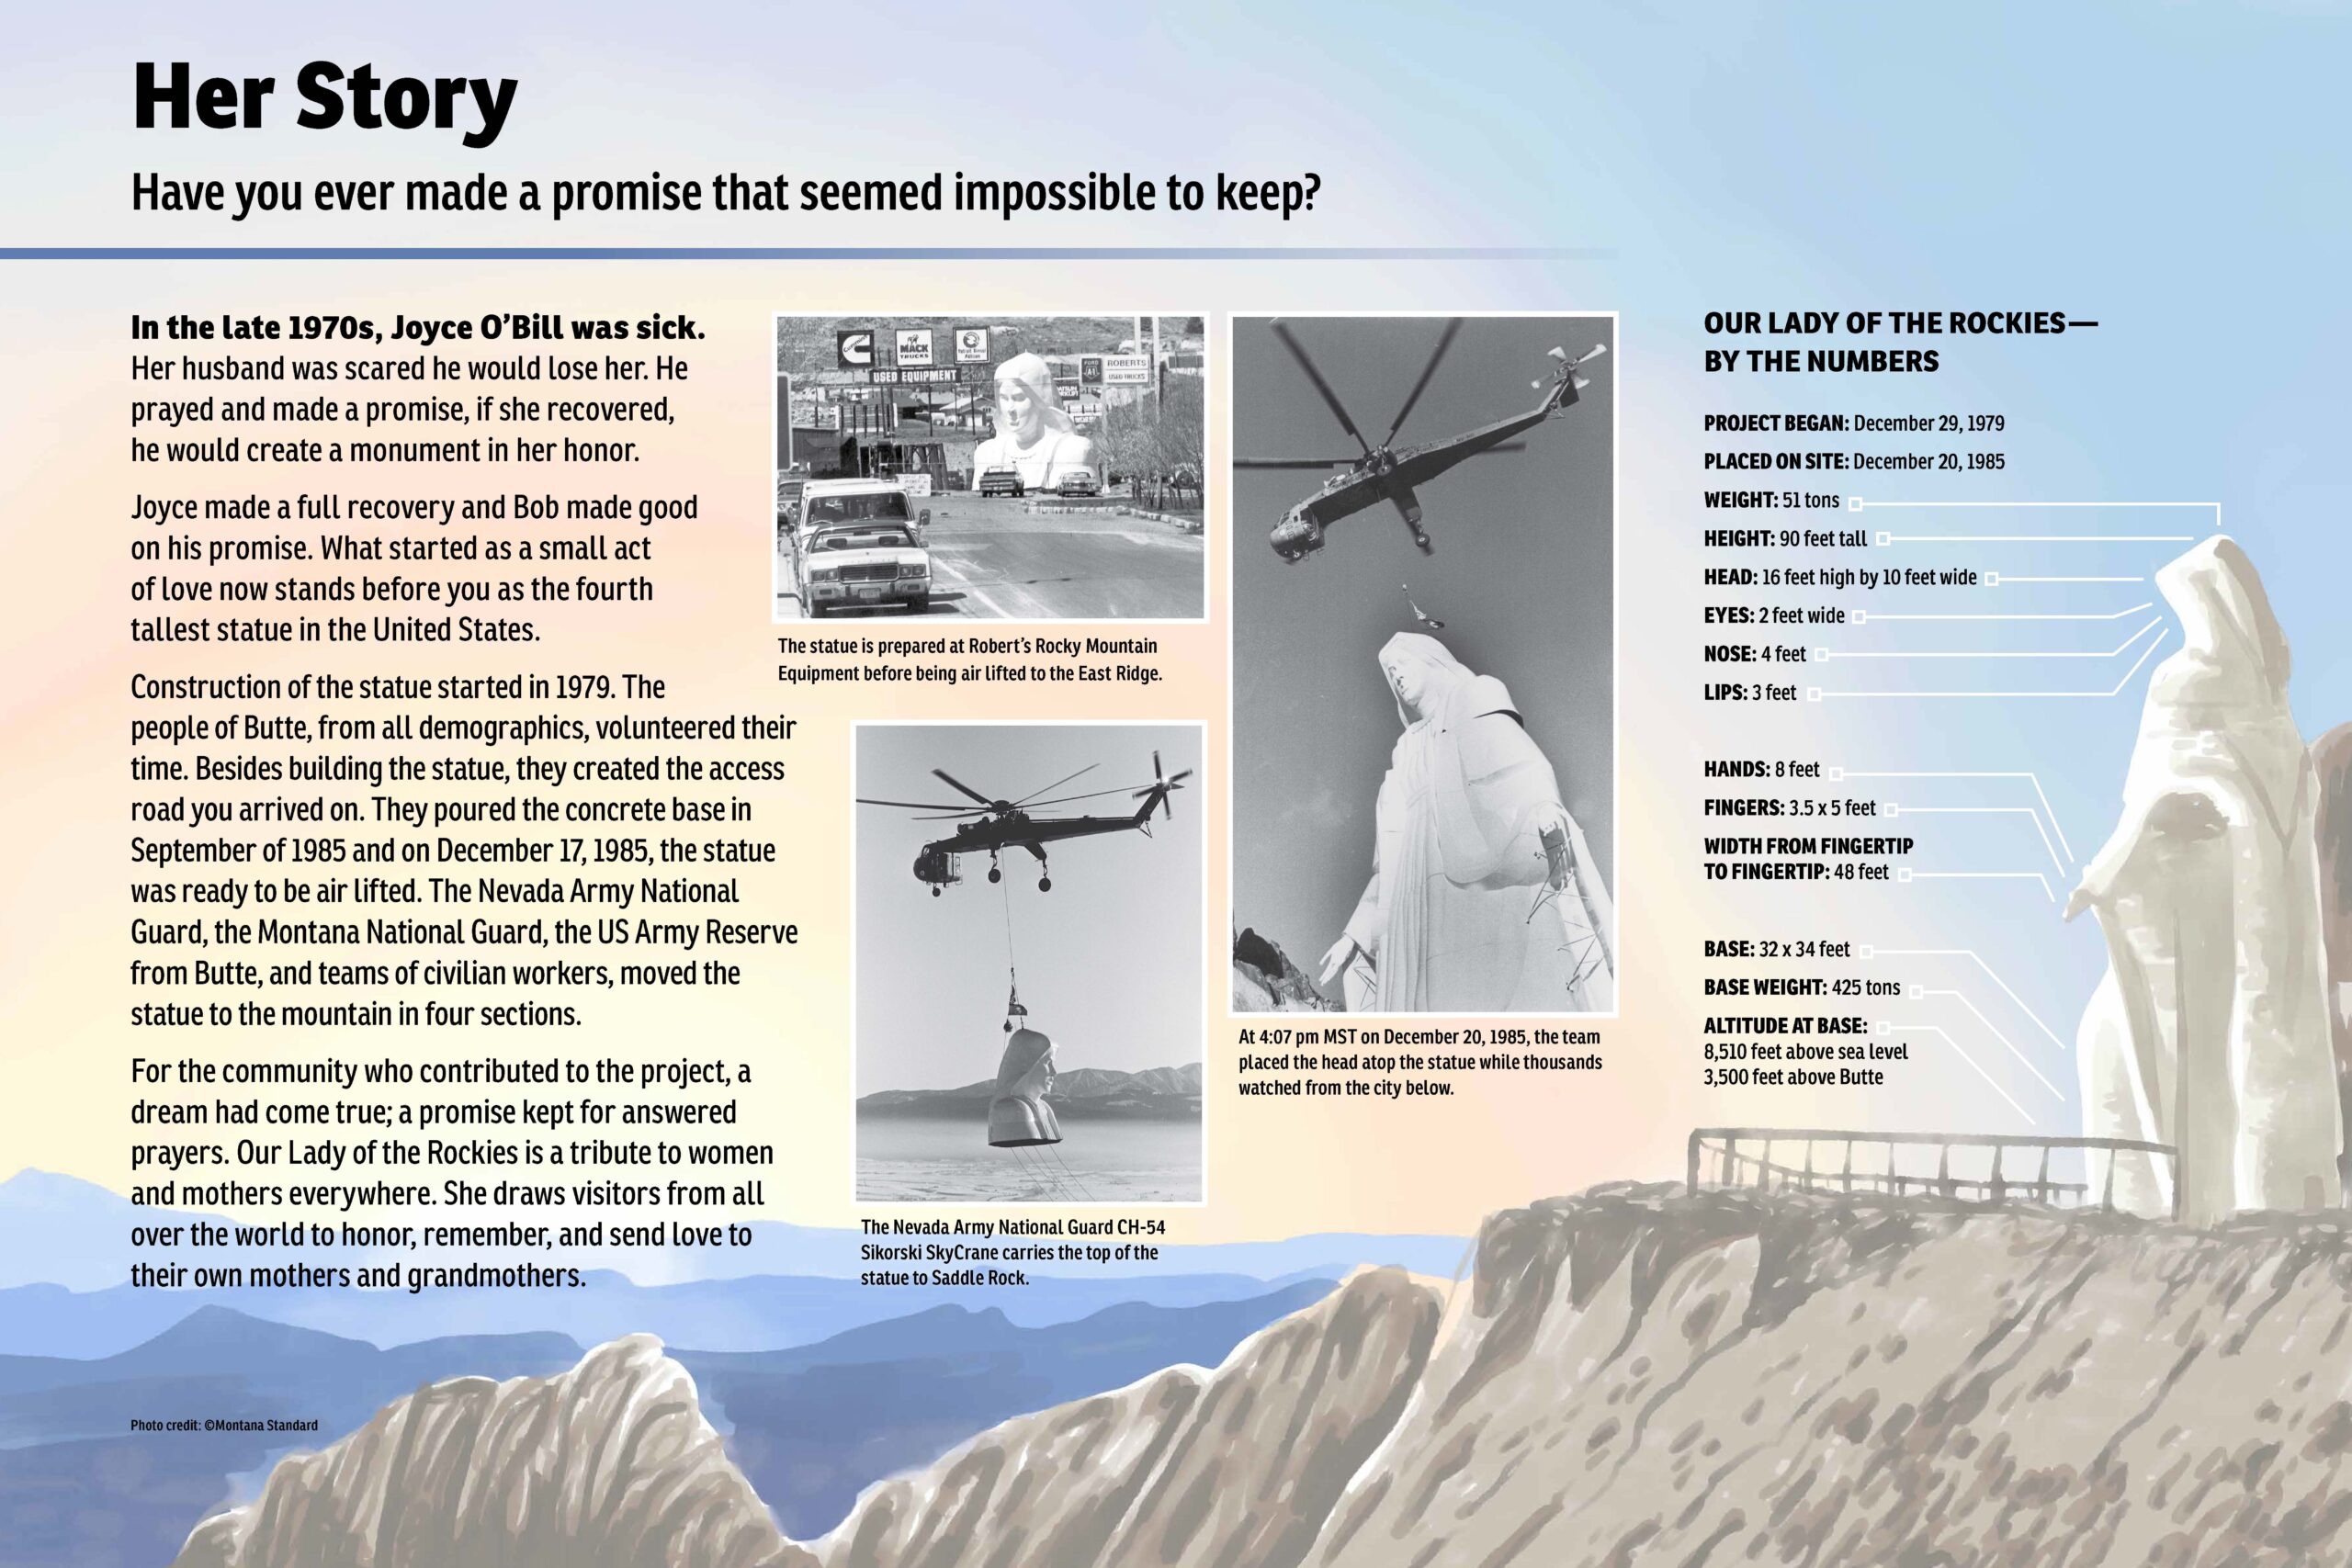 Her Story. Image of the interpretive sign shows the monument of a woman in draped clothing from the side looking out over the valley. Three historical images show how the monument was lifted into place in pieces and assembled on site.